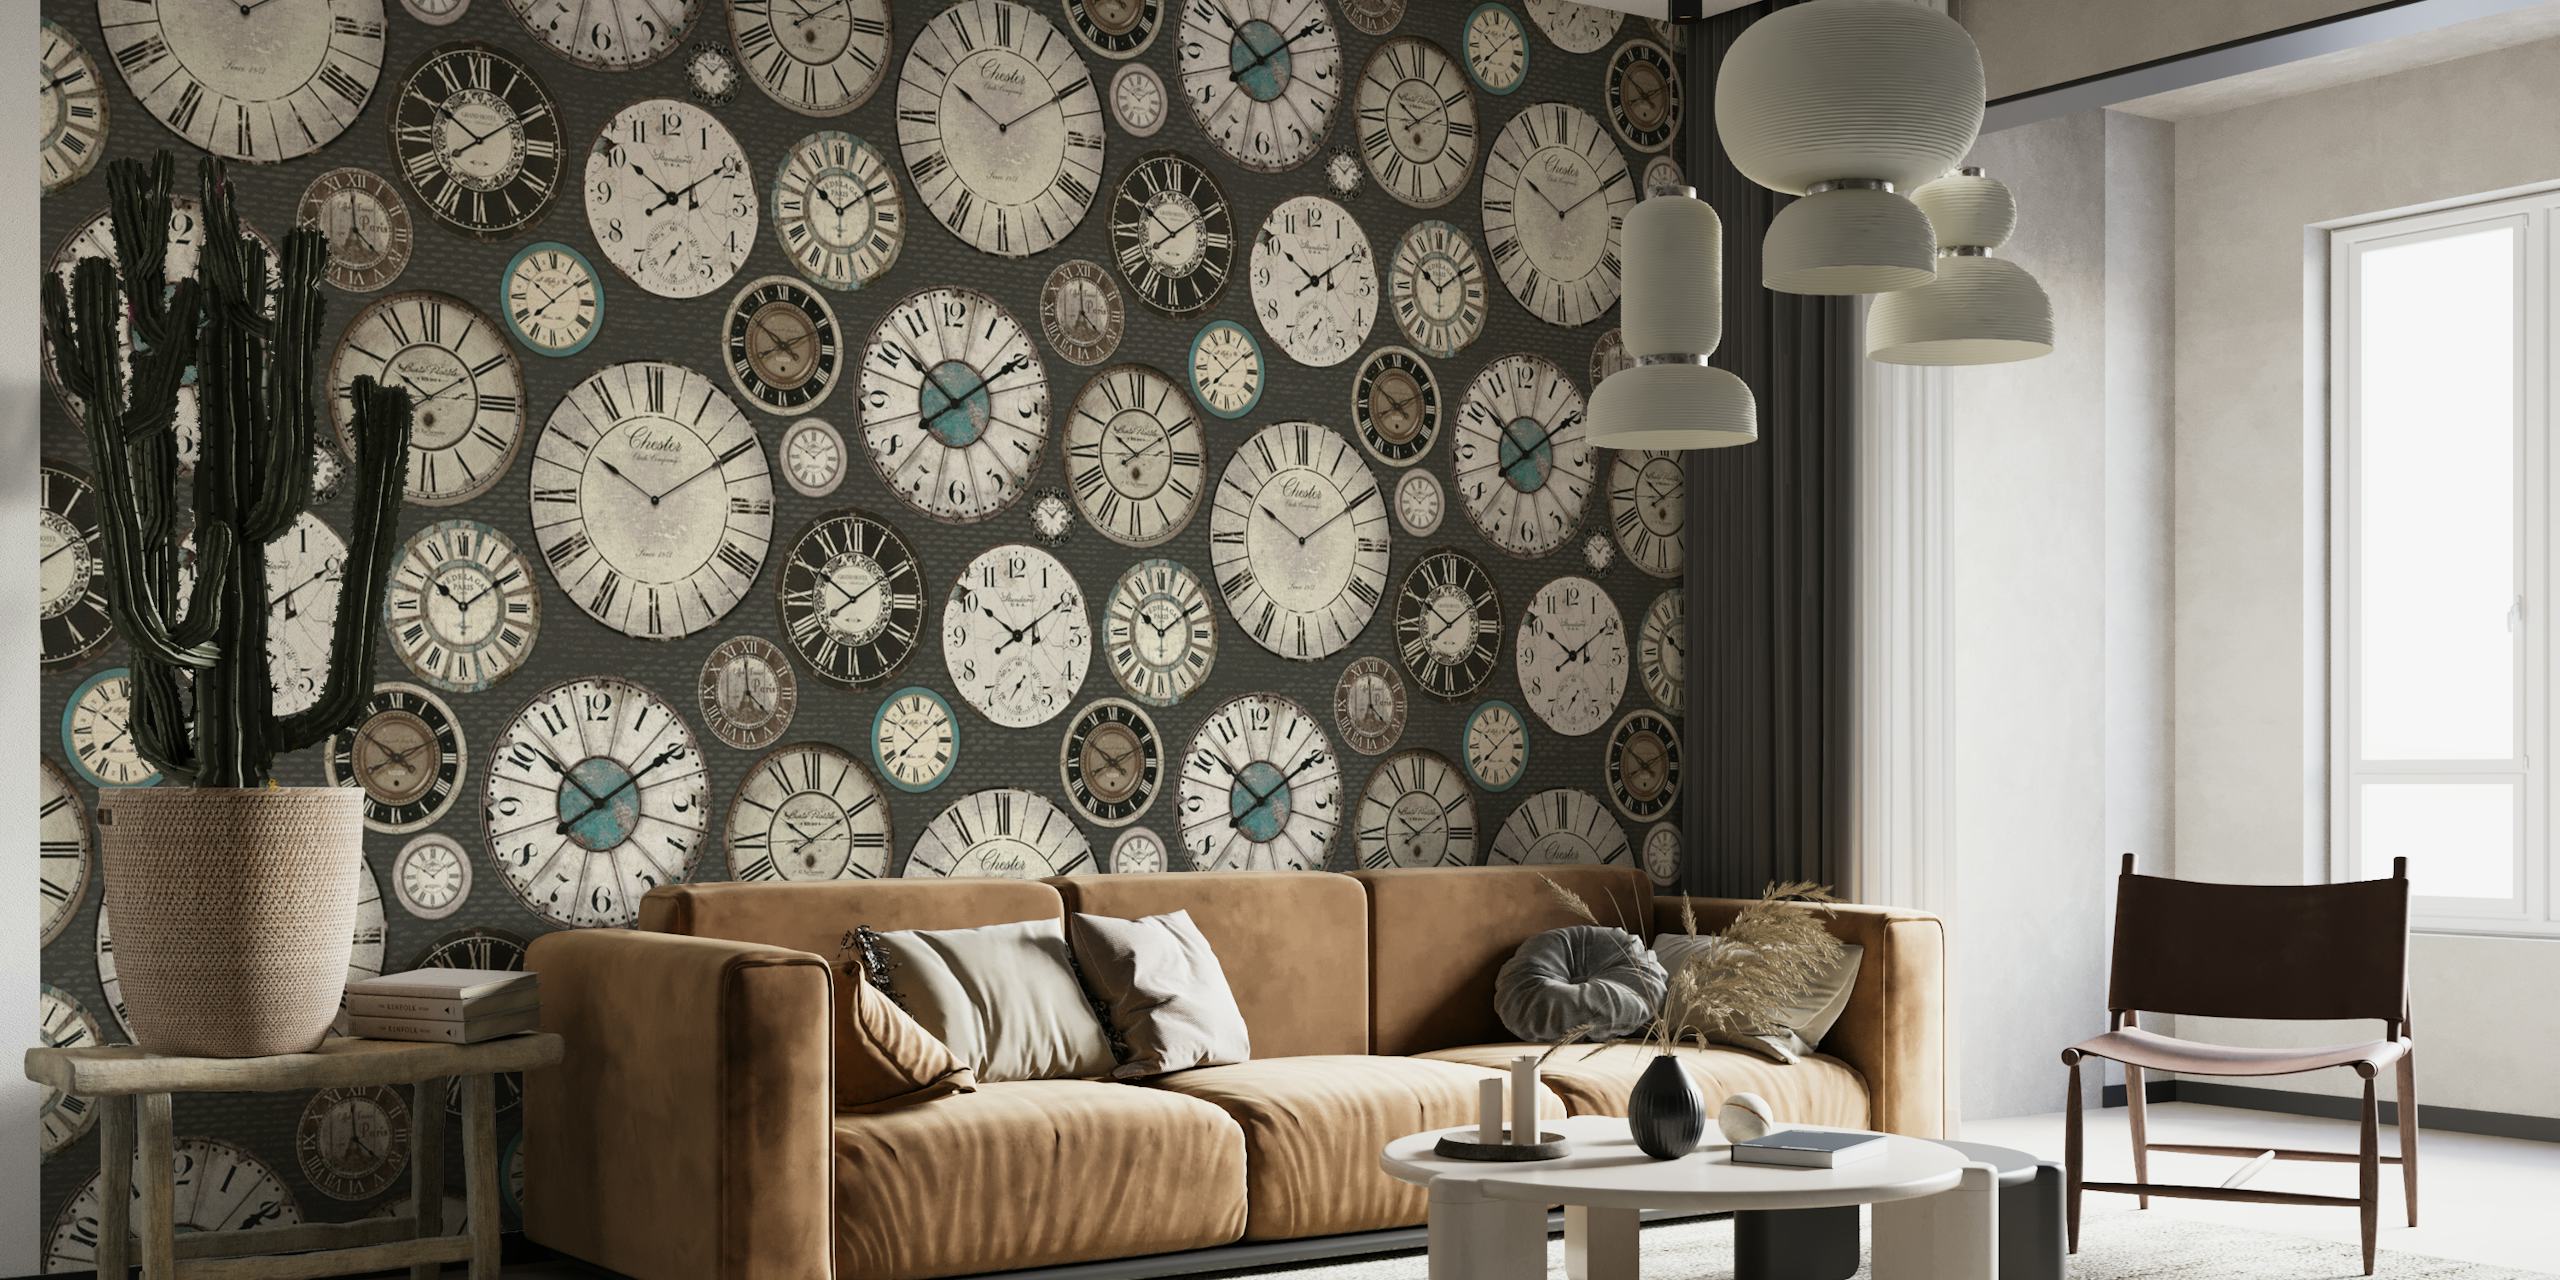 Vintage Clocks wall mural featuring grey, ivory, and blue clock designs for a classic decorative touch